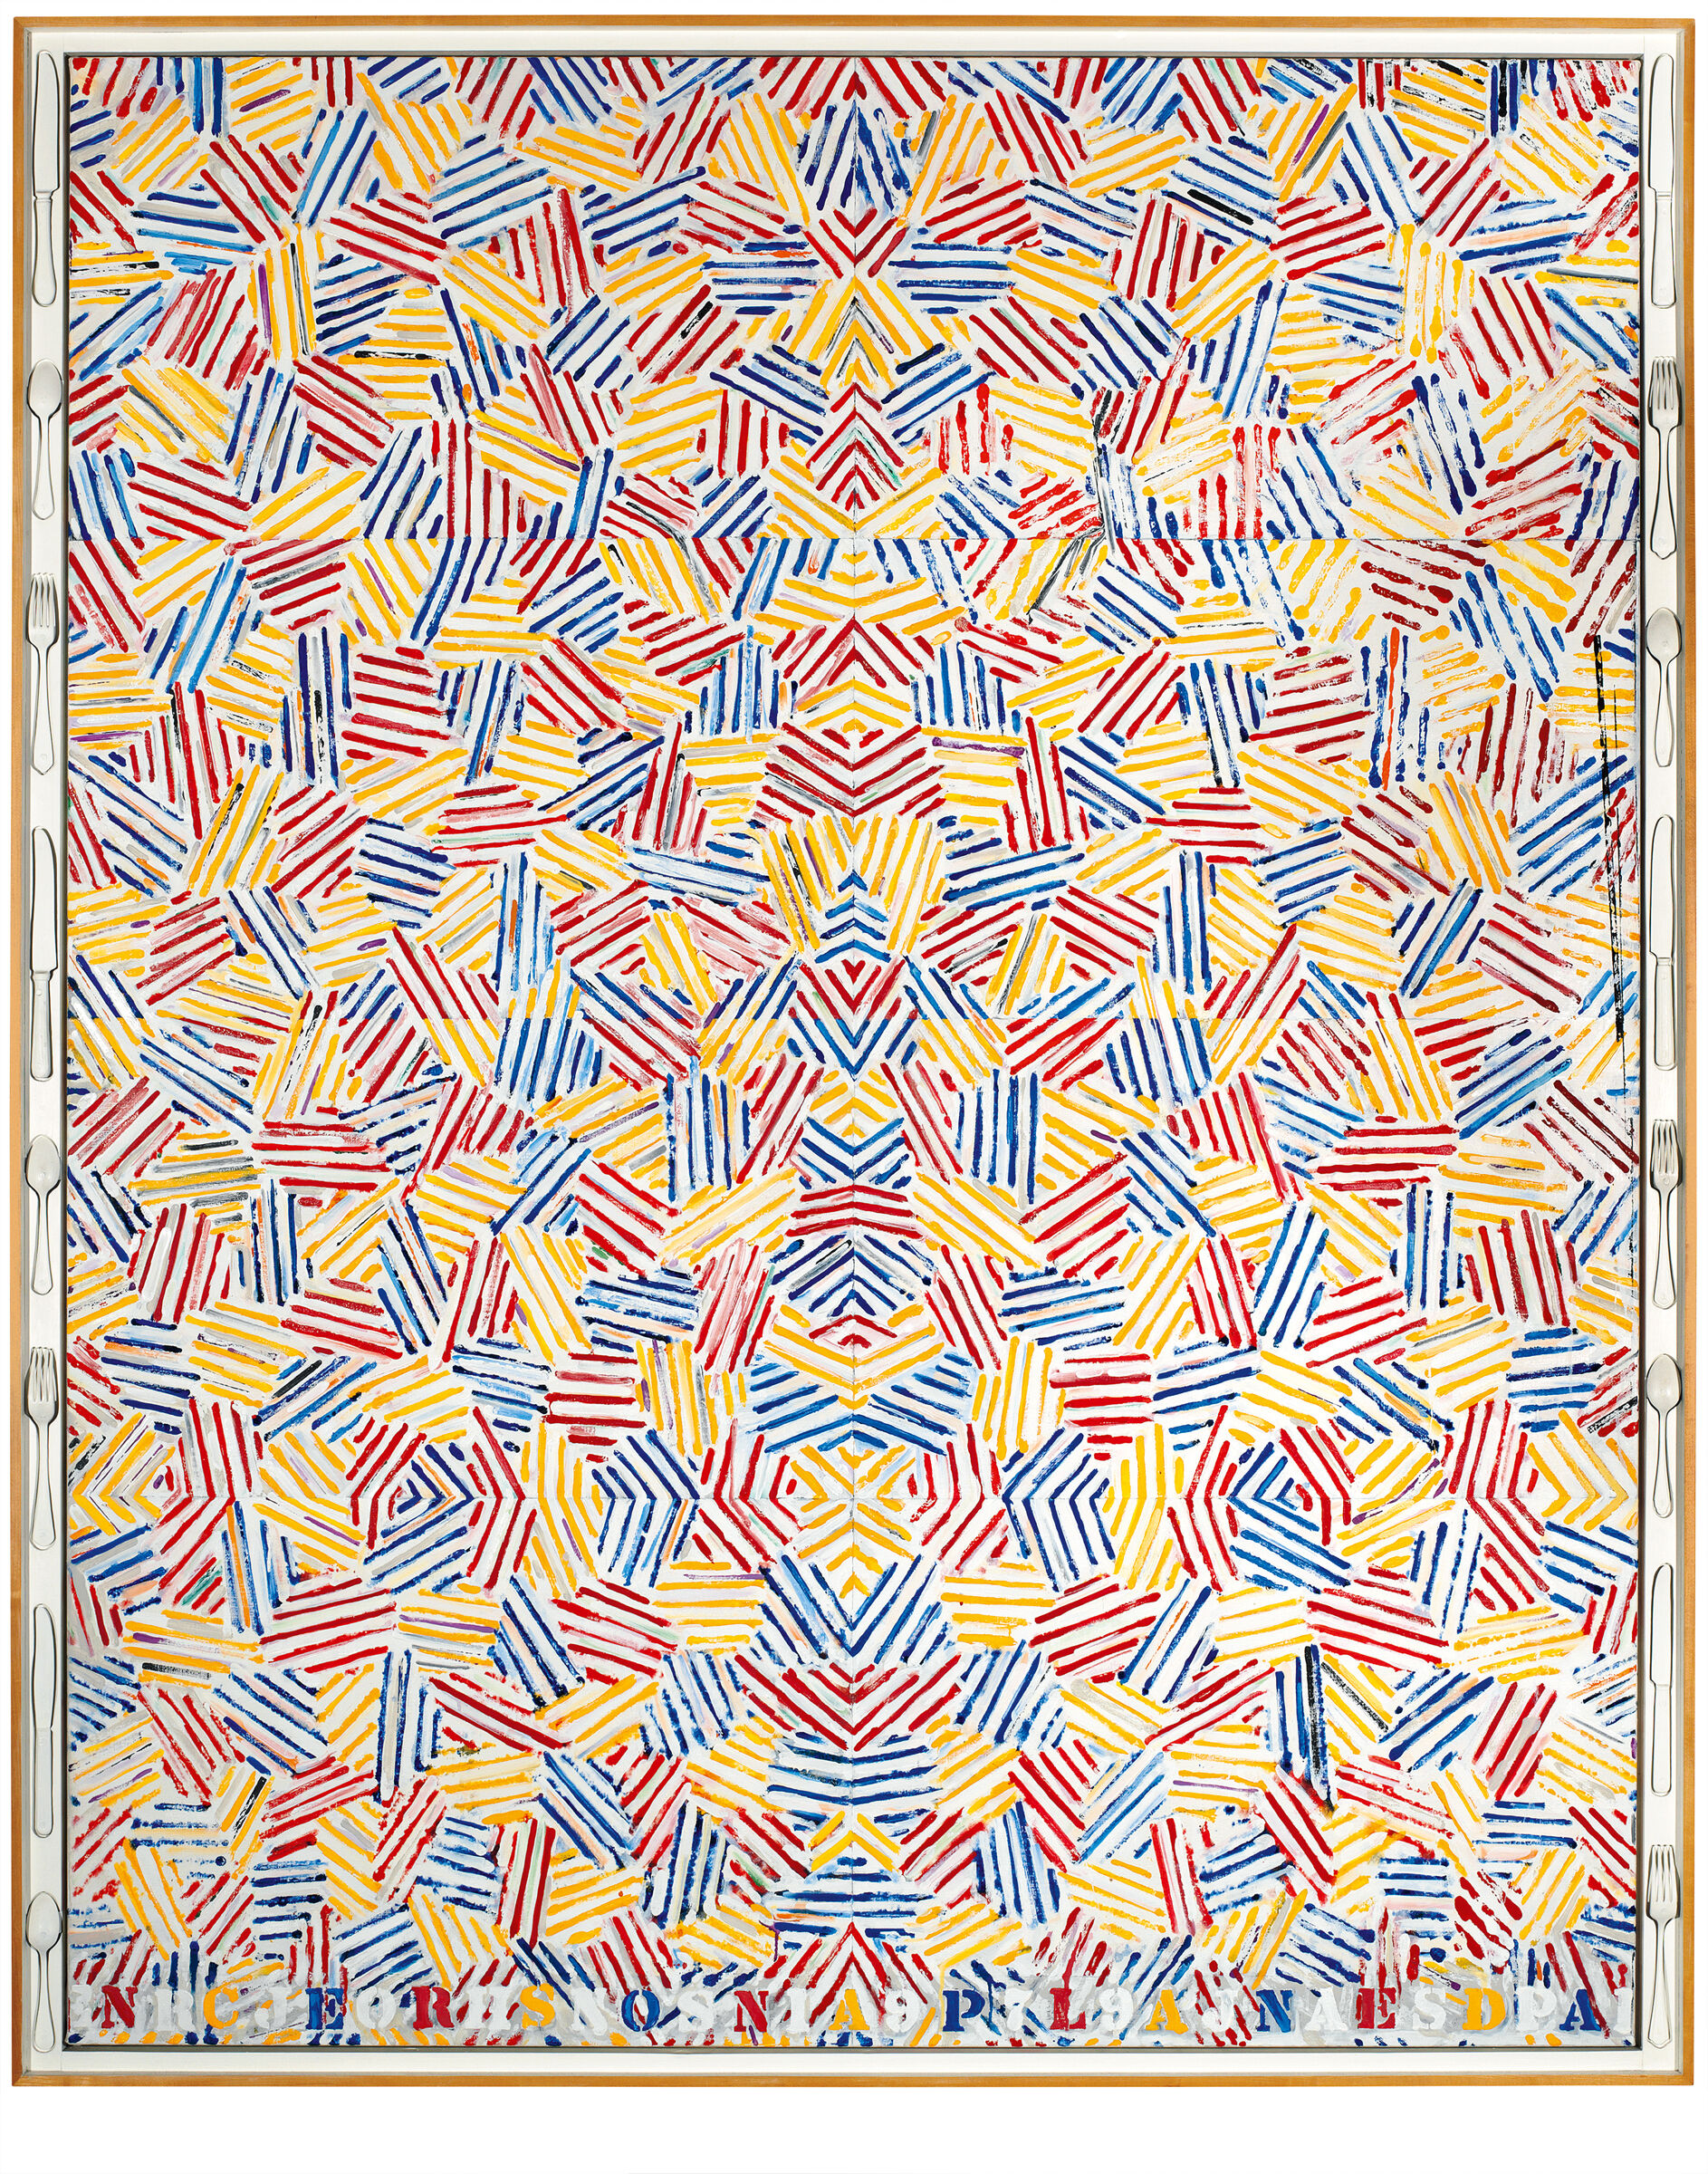 Tessellation of red, yellow, and blue striped patches, with alternating stencil lettering at the bottom edge of the composition reading "DANCERS ON A PLANE JASPER JOHNS 1979", and with spoons, forks, and knives running outside the left and right sides of the painting.